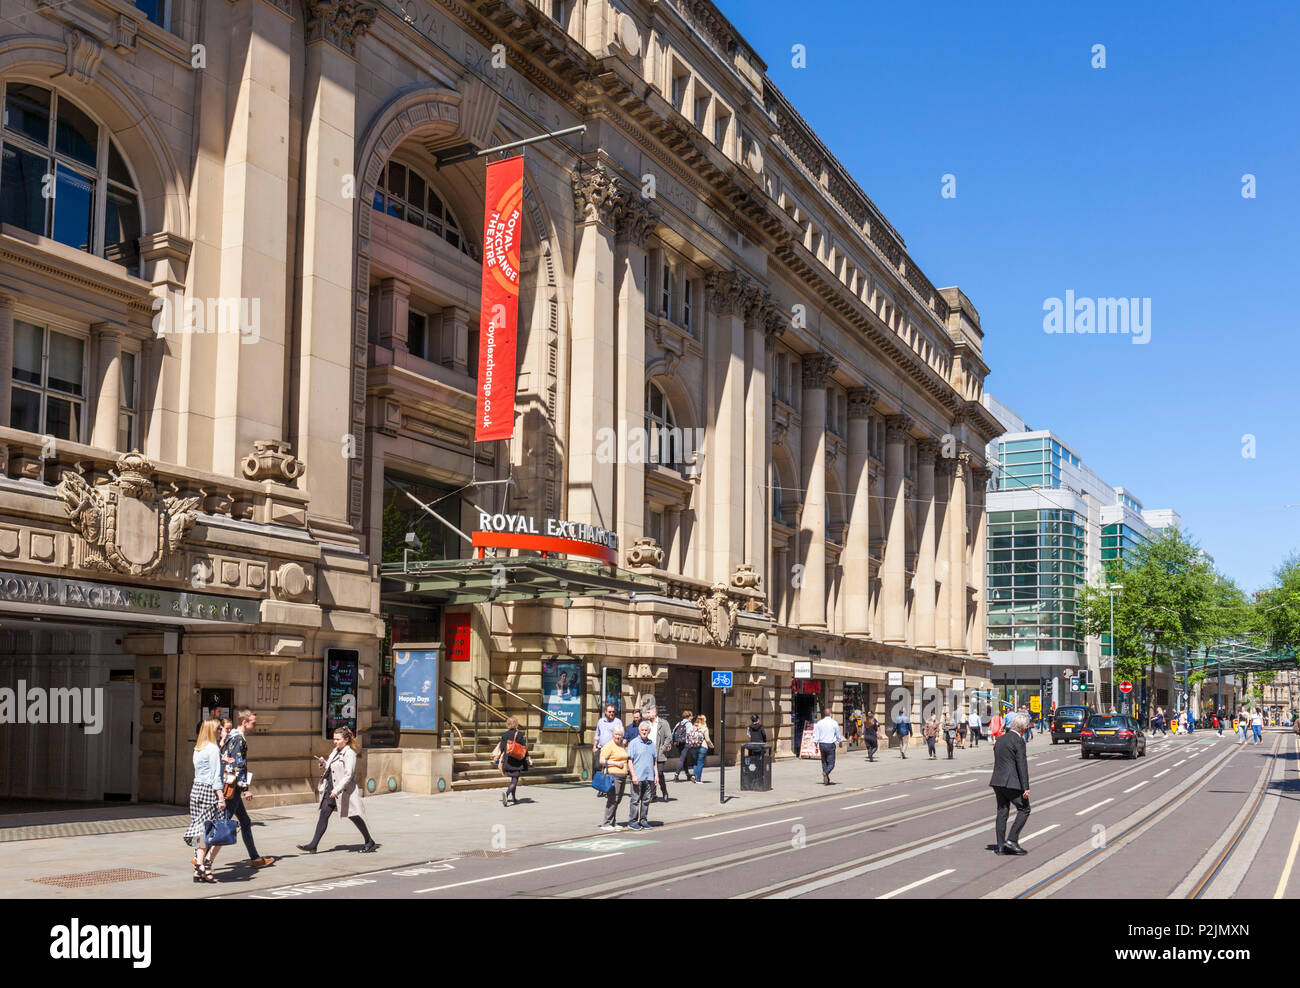 England Manchester England Greater Manchester City Centre Royal Exchange Theatre und Royal Exchange arcade Cross Street Manchester City Centre Großbritannien Stockfoto